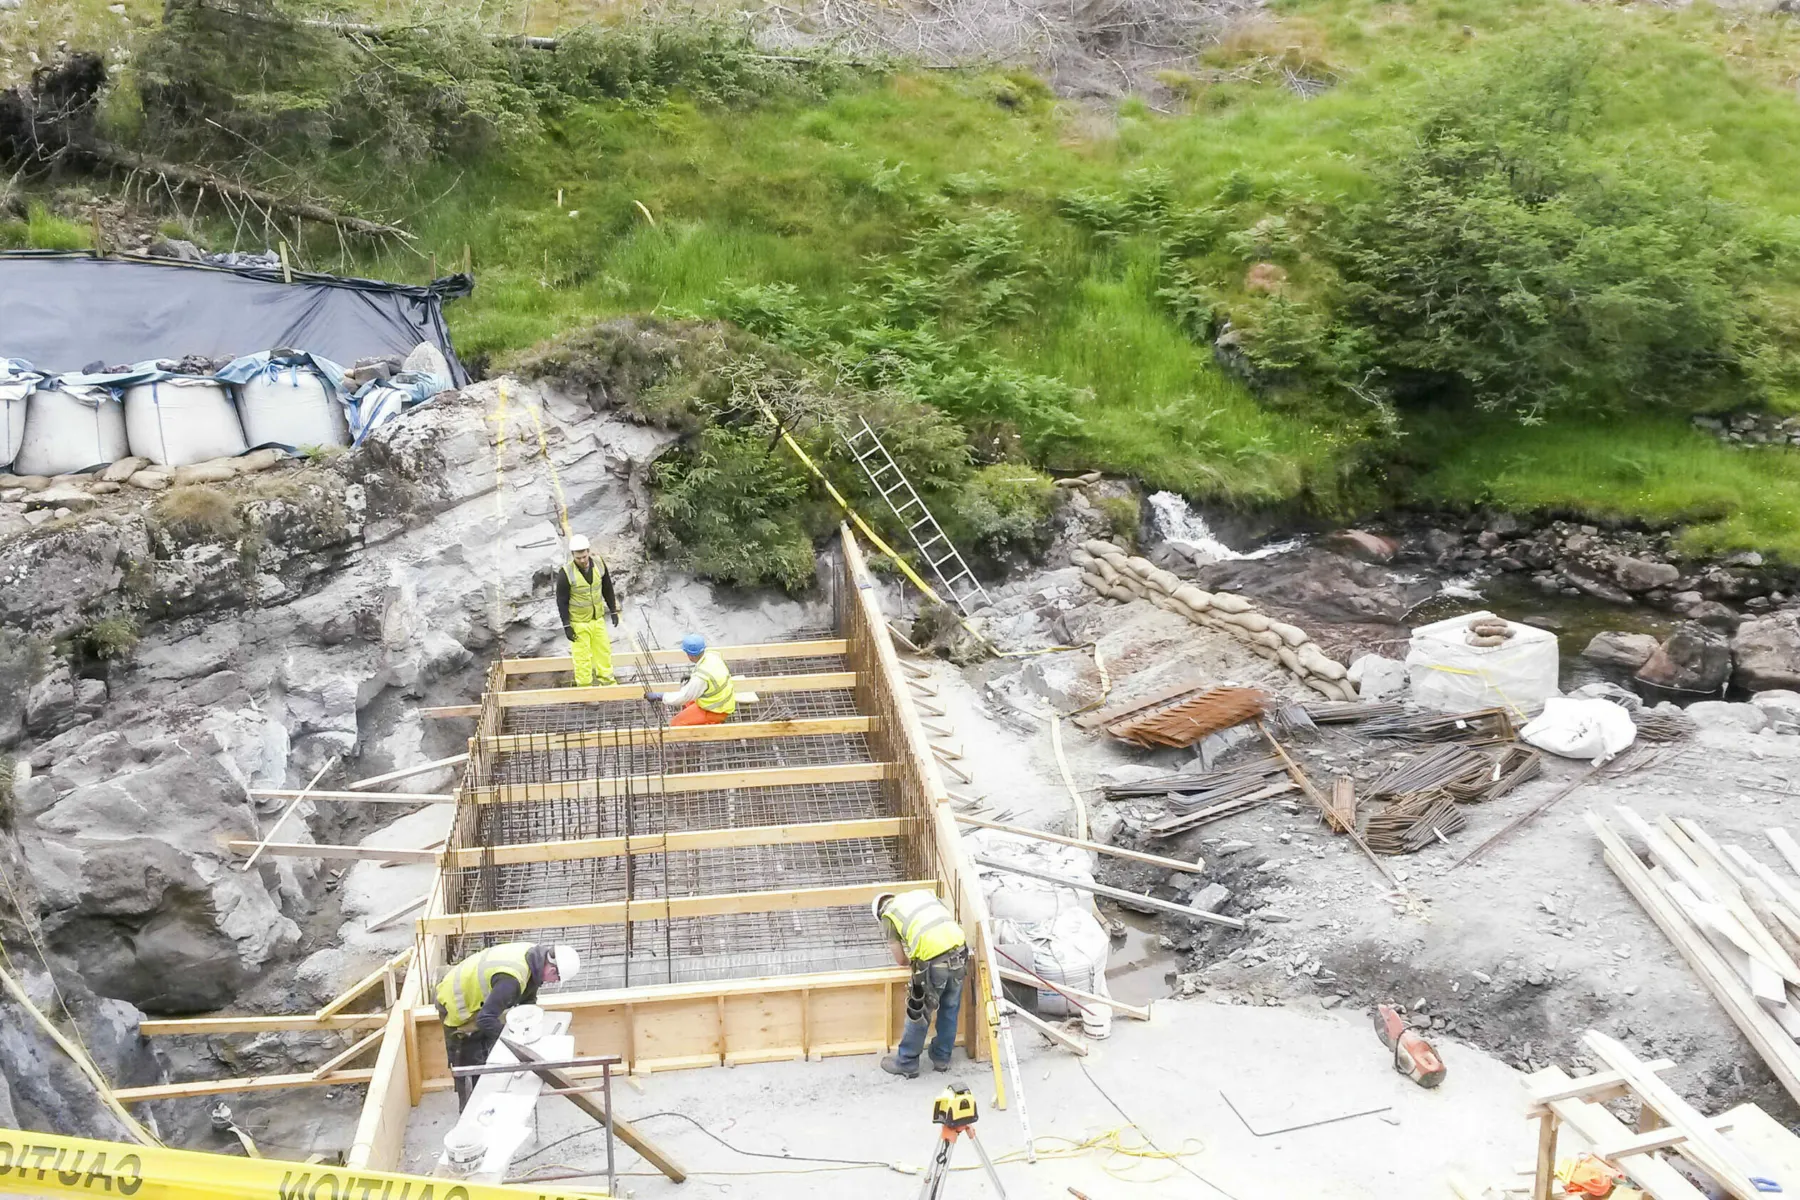 A hydro scheme under construction in Scotland. A timber frame is built across a river supported by concrete. Four workers in hi-vis are position across the structure. In the background rock that has been cut into  is visible.